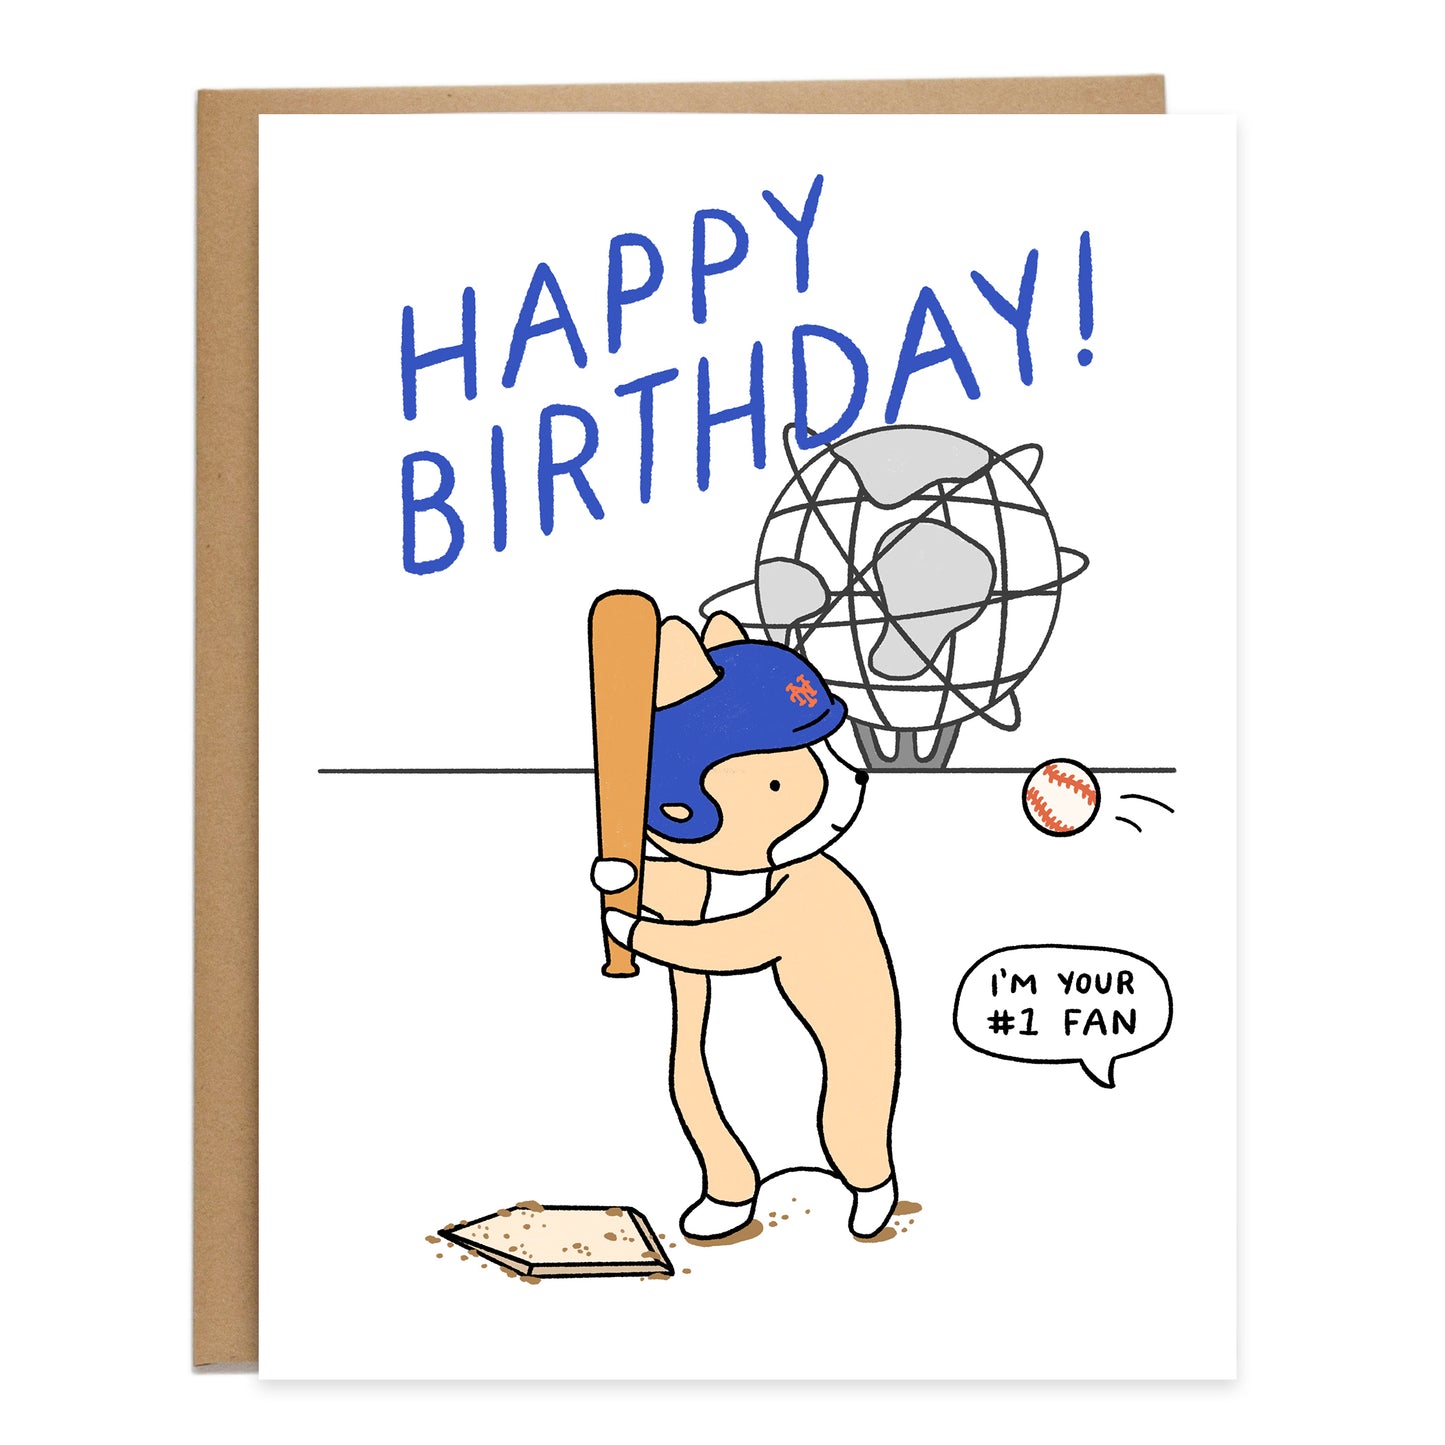 A drawing of a corgi wearing a mets helmet at bat, playing baseball with the unisphere globe from queens, ny behind them. In large blue letters the card reads, happy birthday, with a speech bubble on the corner that says, I'm your #1 fan